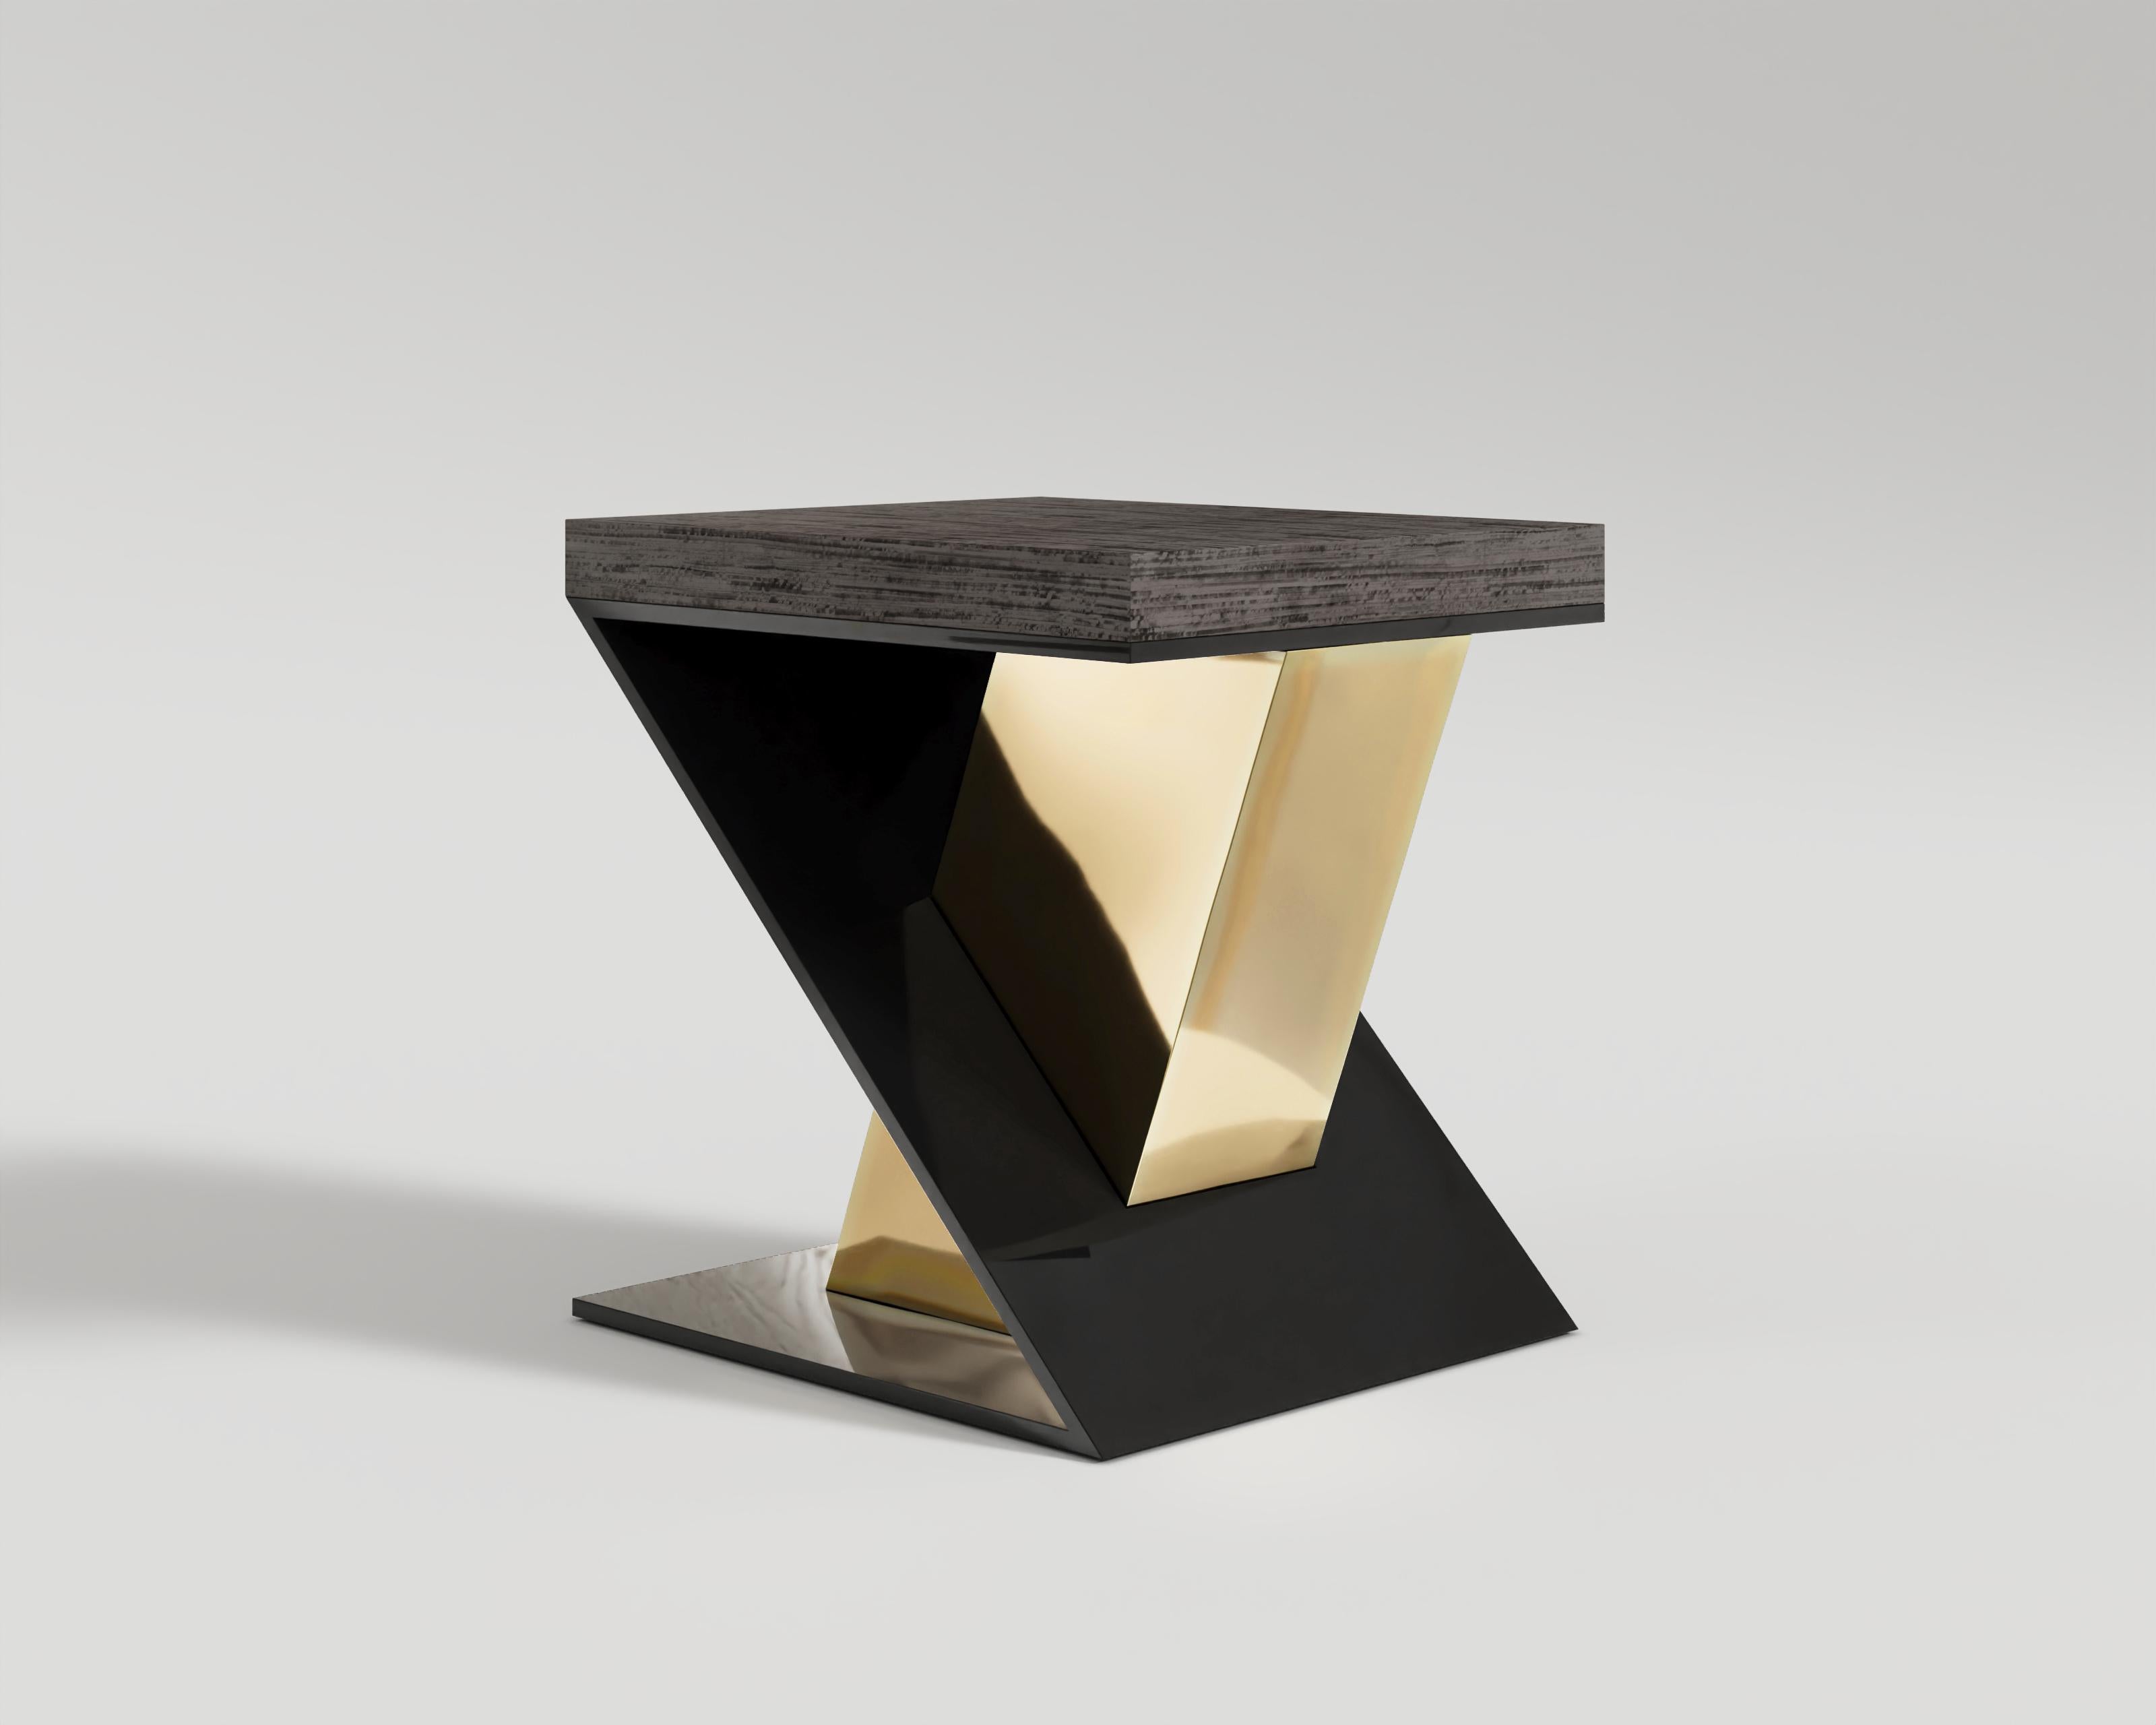 Gero Side Table
Gero Side Table no doubt a dark voice of fashion design. The strong black lacquer serves as the base, and the polished bronze that crosses it reveals a contrasting texture. It is a kind of a junction where materials participate and